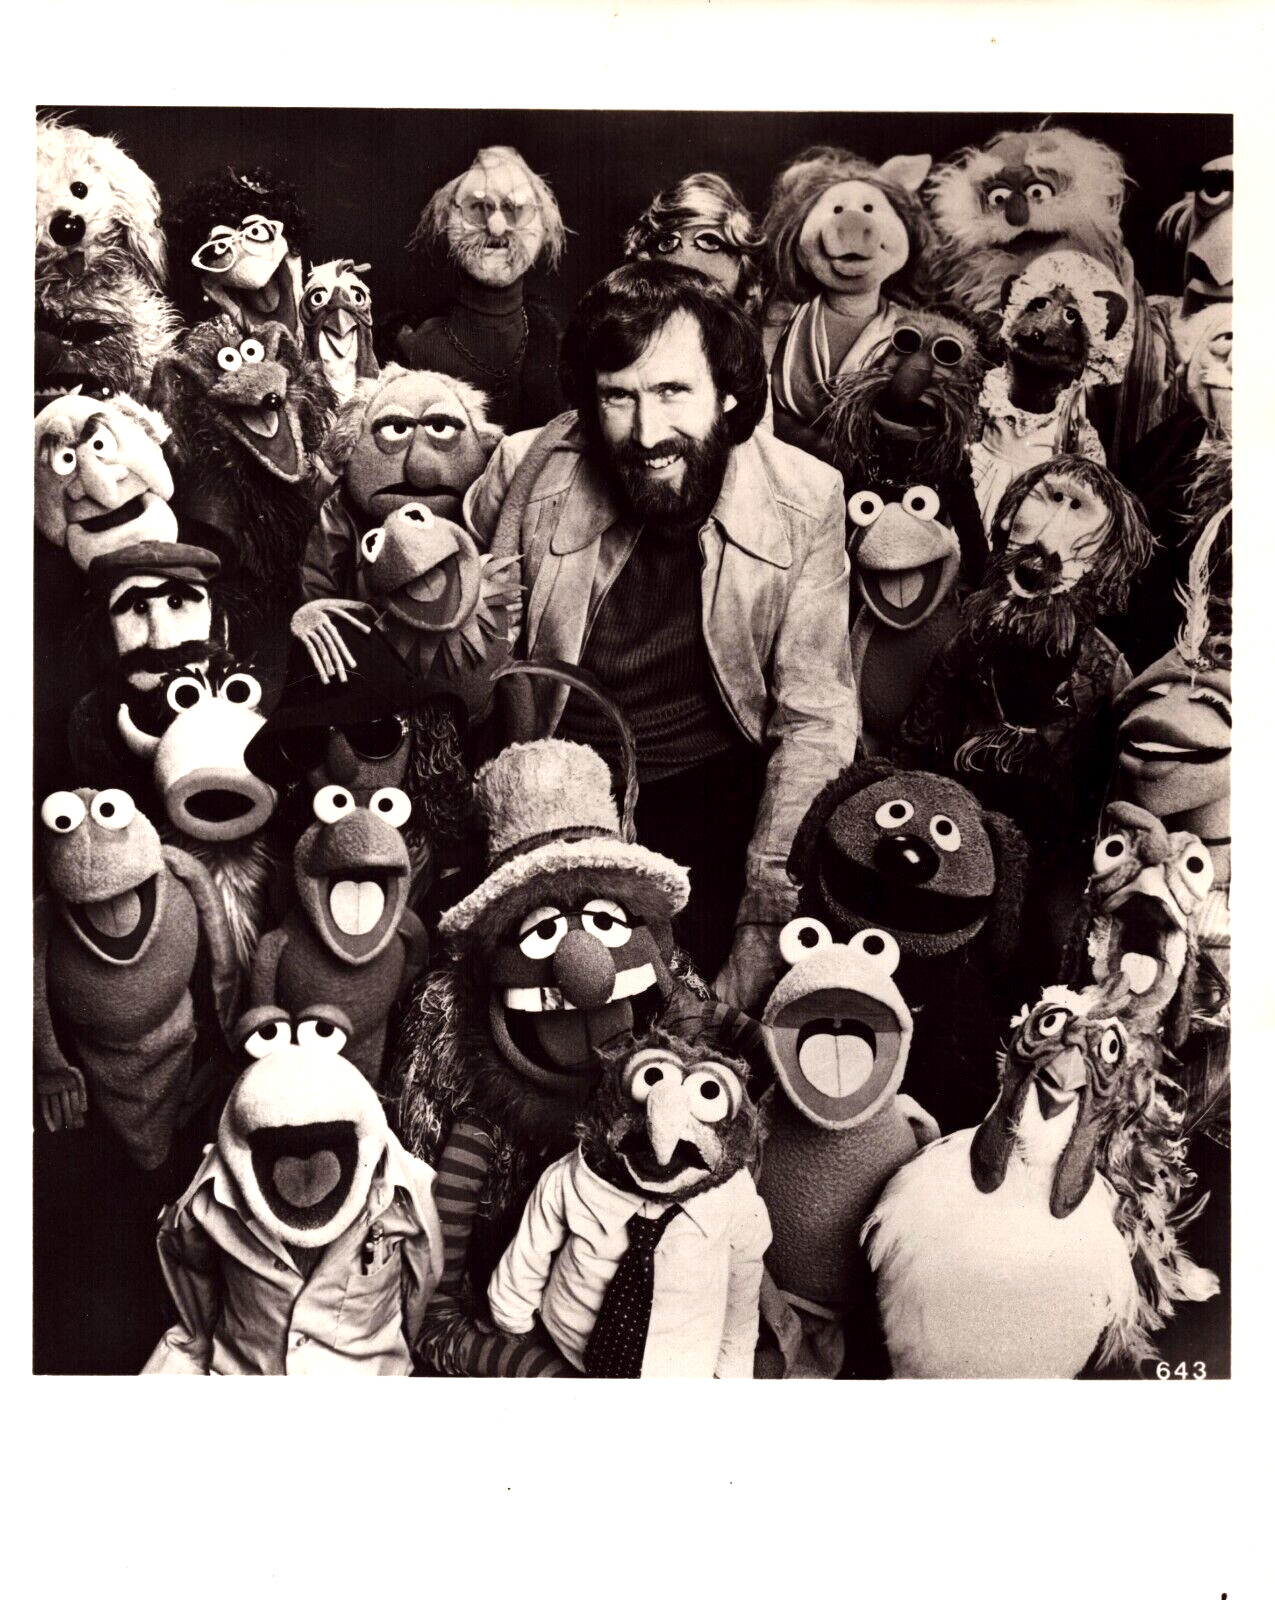 Vintage 1970s Jim Henson and Muppets Glossy 8x10 B/W Publicity Photograph #643